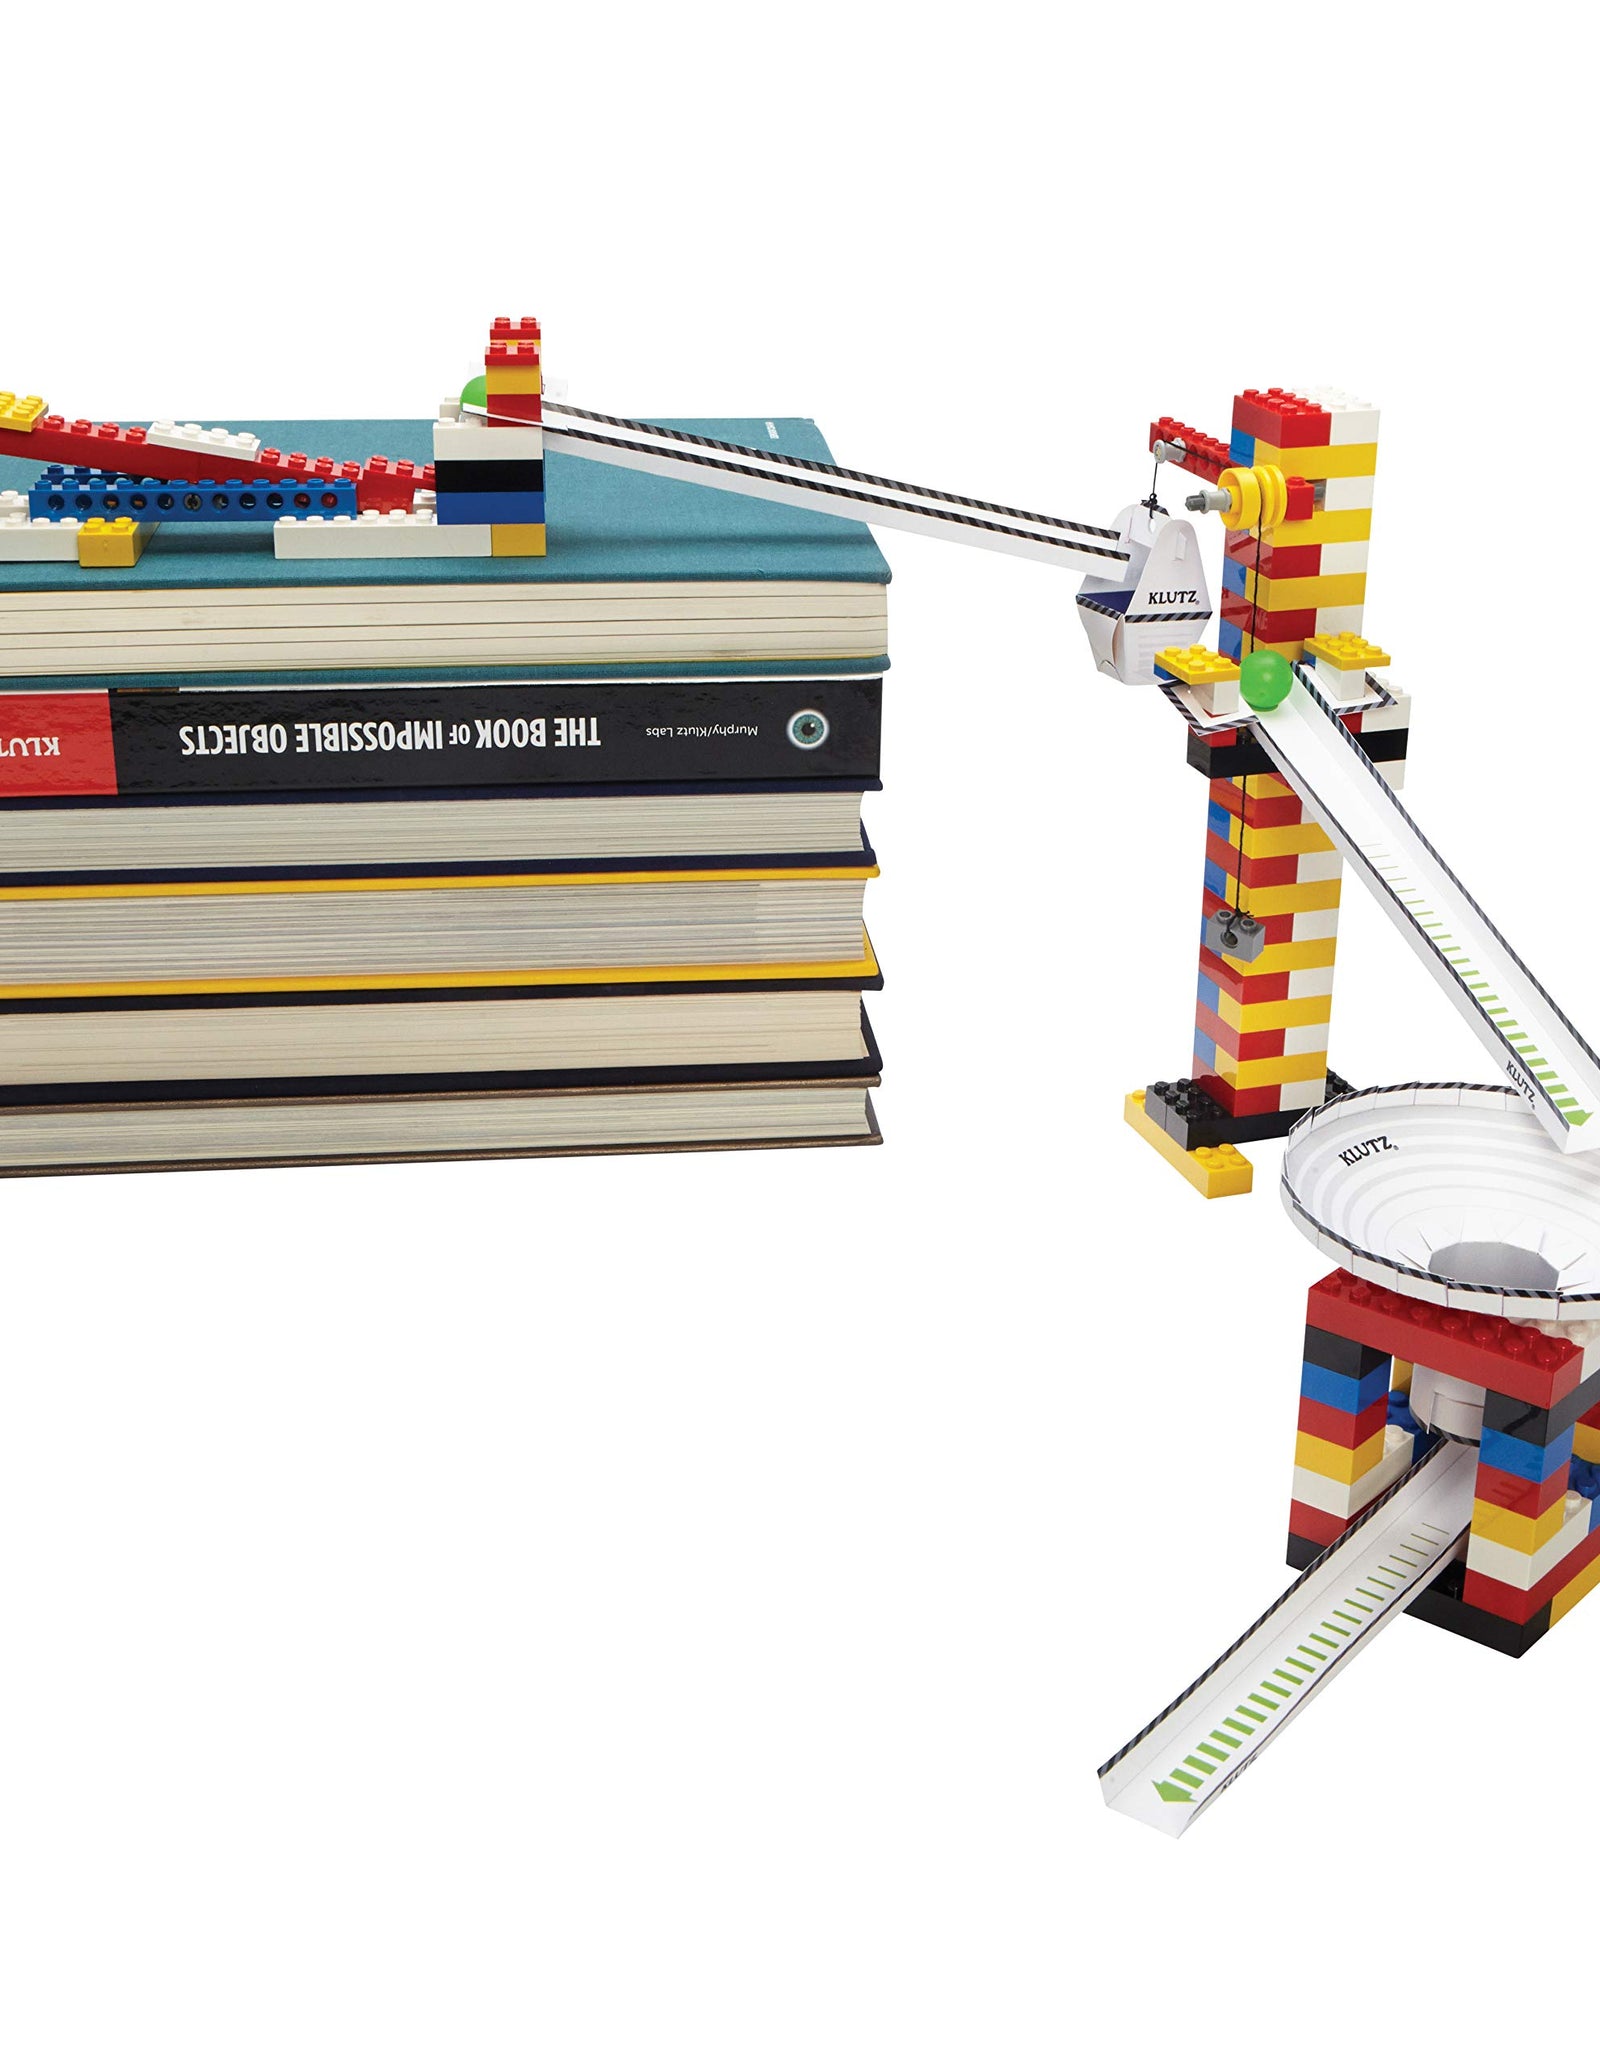 LEGO Chain Reactions (Klutz Science/STEM Activity Kit), 9" Length x 1.06" Width x 10" Height